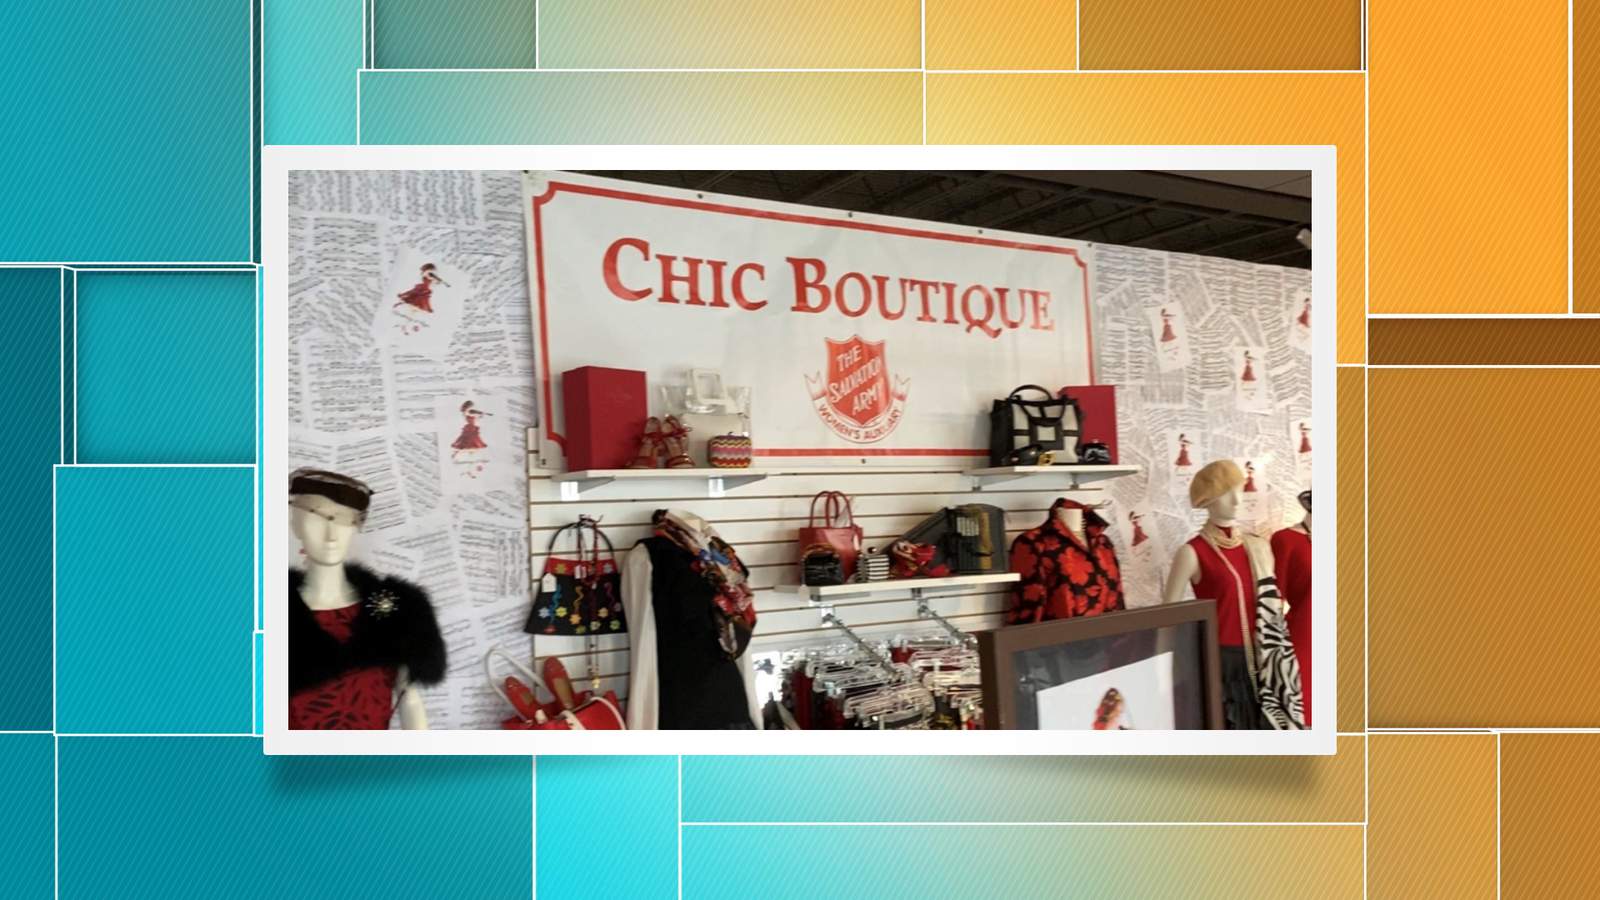 Check out the exciting Chic Boutique clothing sale this Wednesday through Saturday